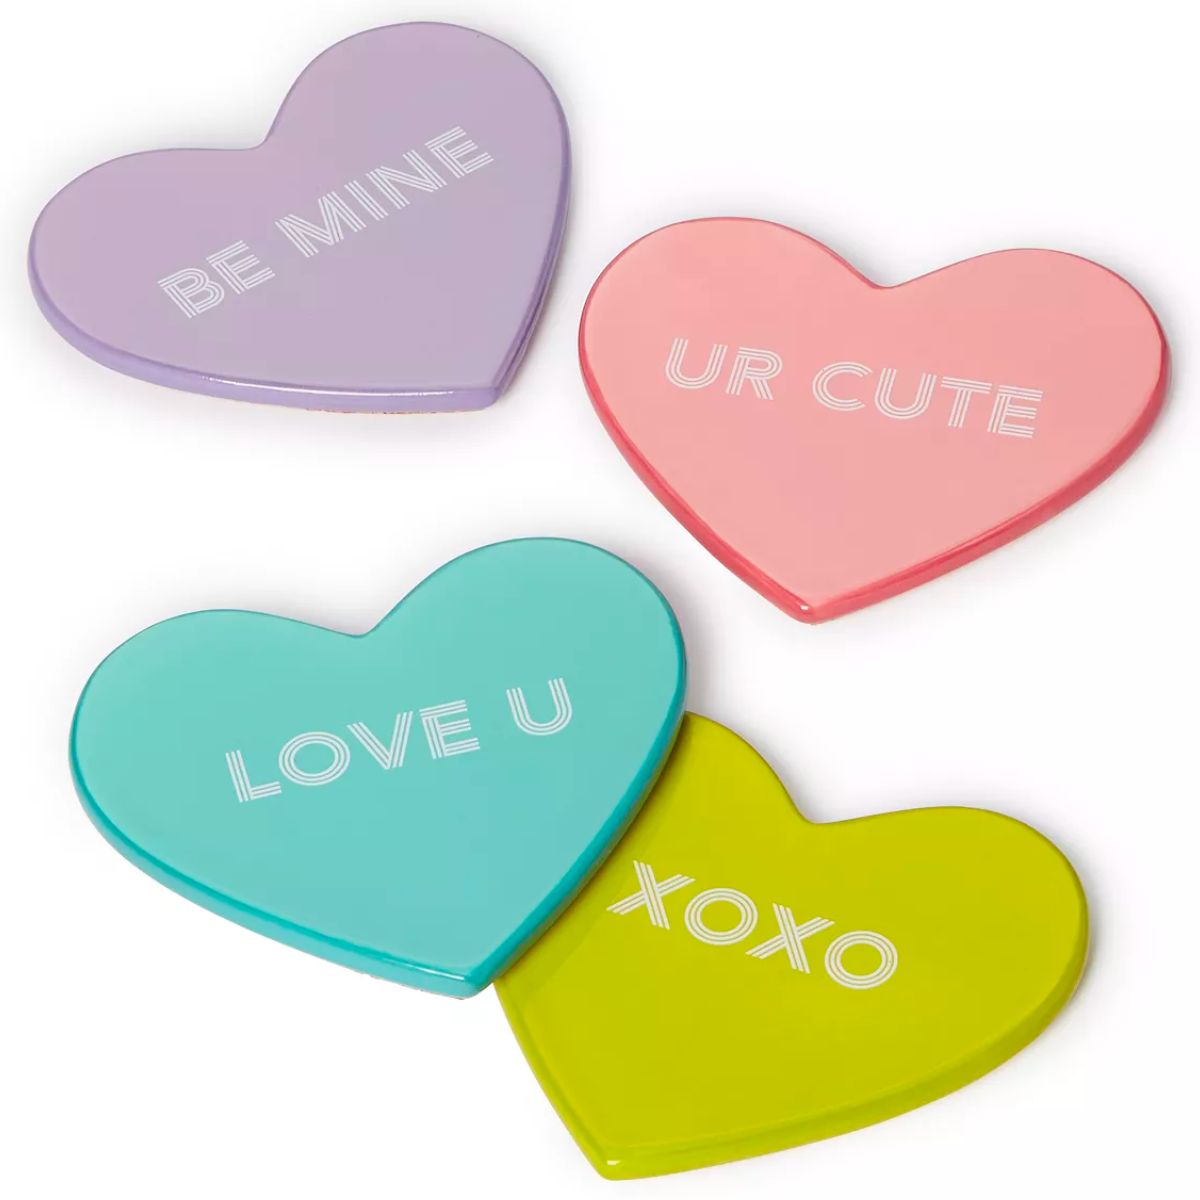 4 heart pastel colored Heart shaped Coasters 